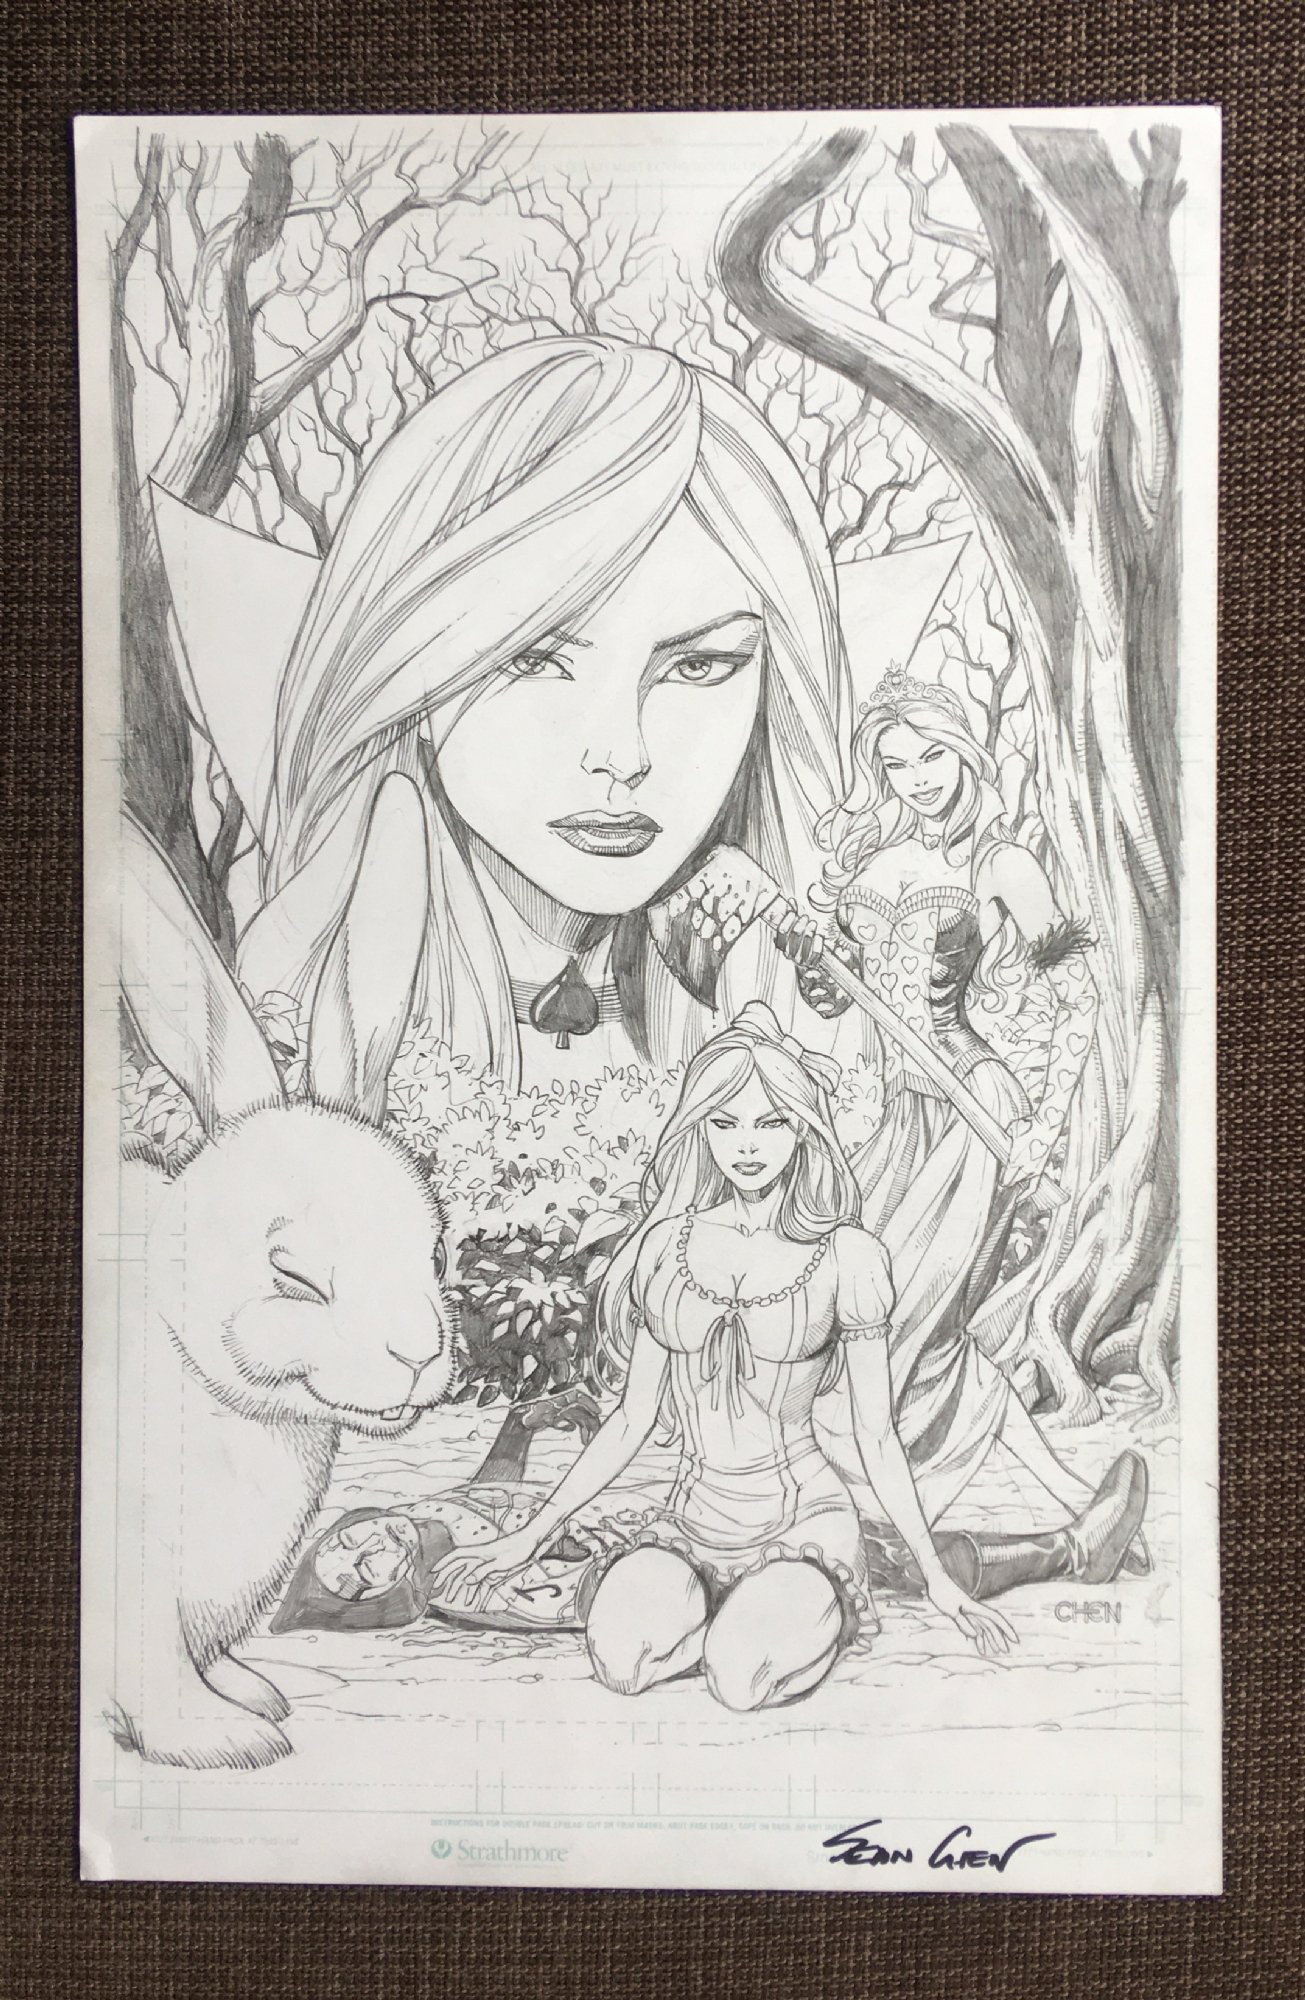 Zenescope GRIMM FAIRY TALES Presents ALICE IN WONDERLAND #3 Variant Cover B  2. 1.200 euros, in ENRIQUE ALONSO's XXX. FOR SALE Comic Art Gallery Room